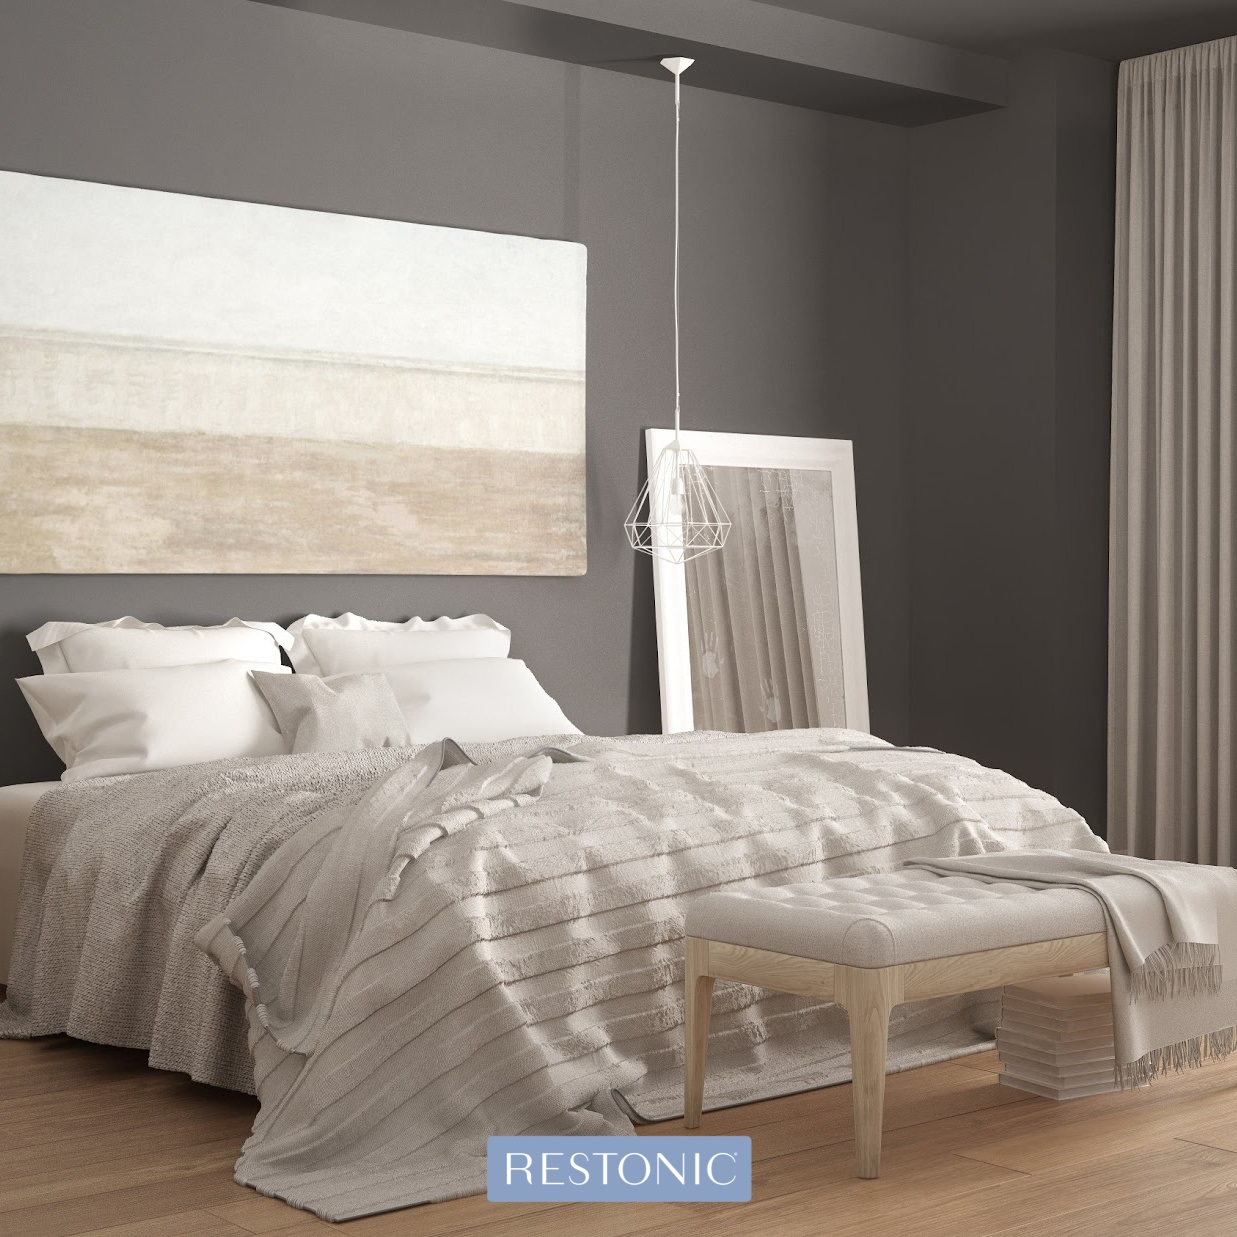 Down Versus Down Alternatives – Discover What Type of Bedding is Best for You